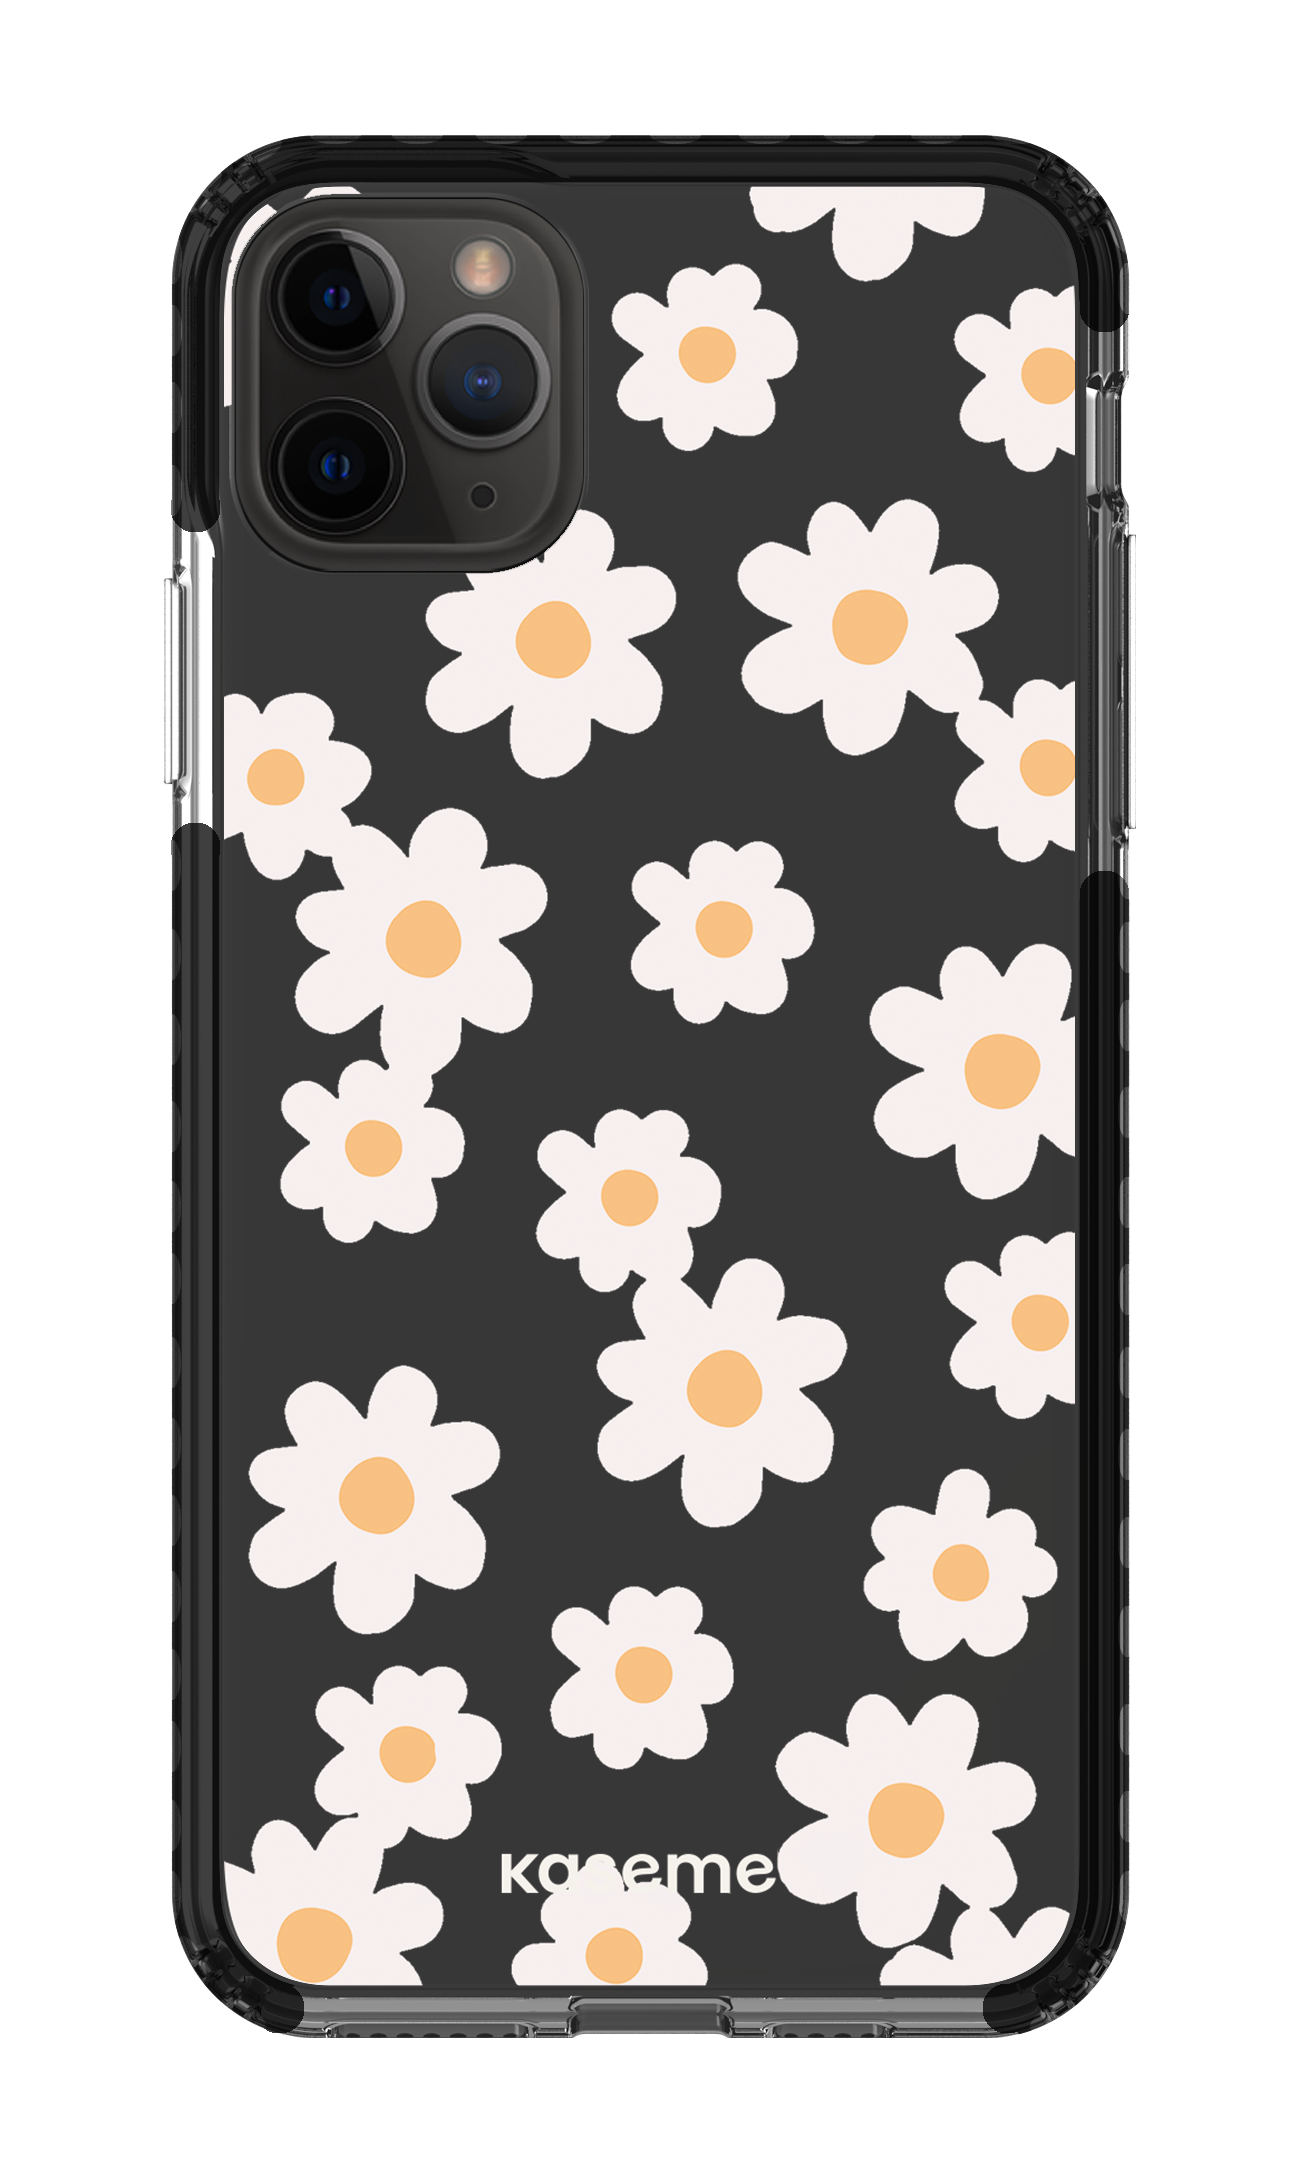 May Clear Case - iPhone 11 Pro Max